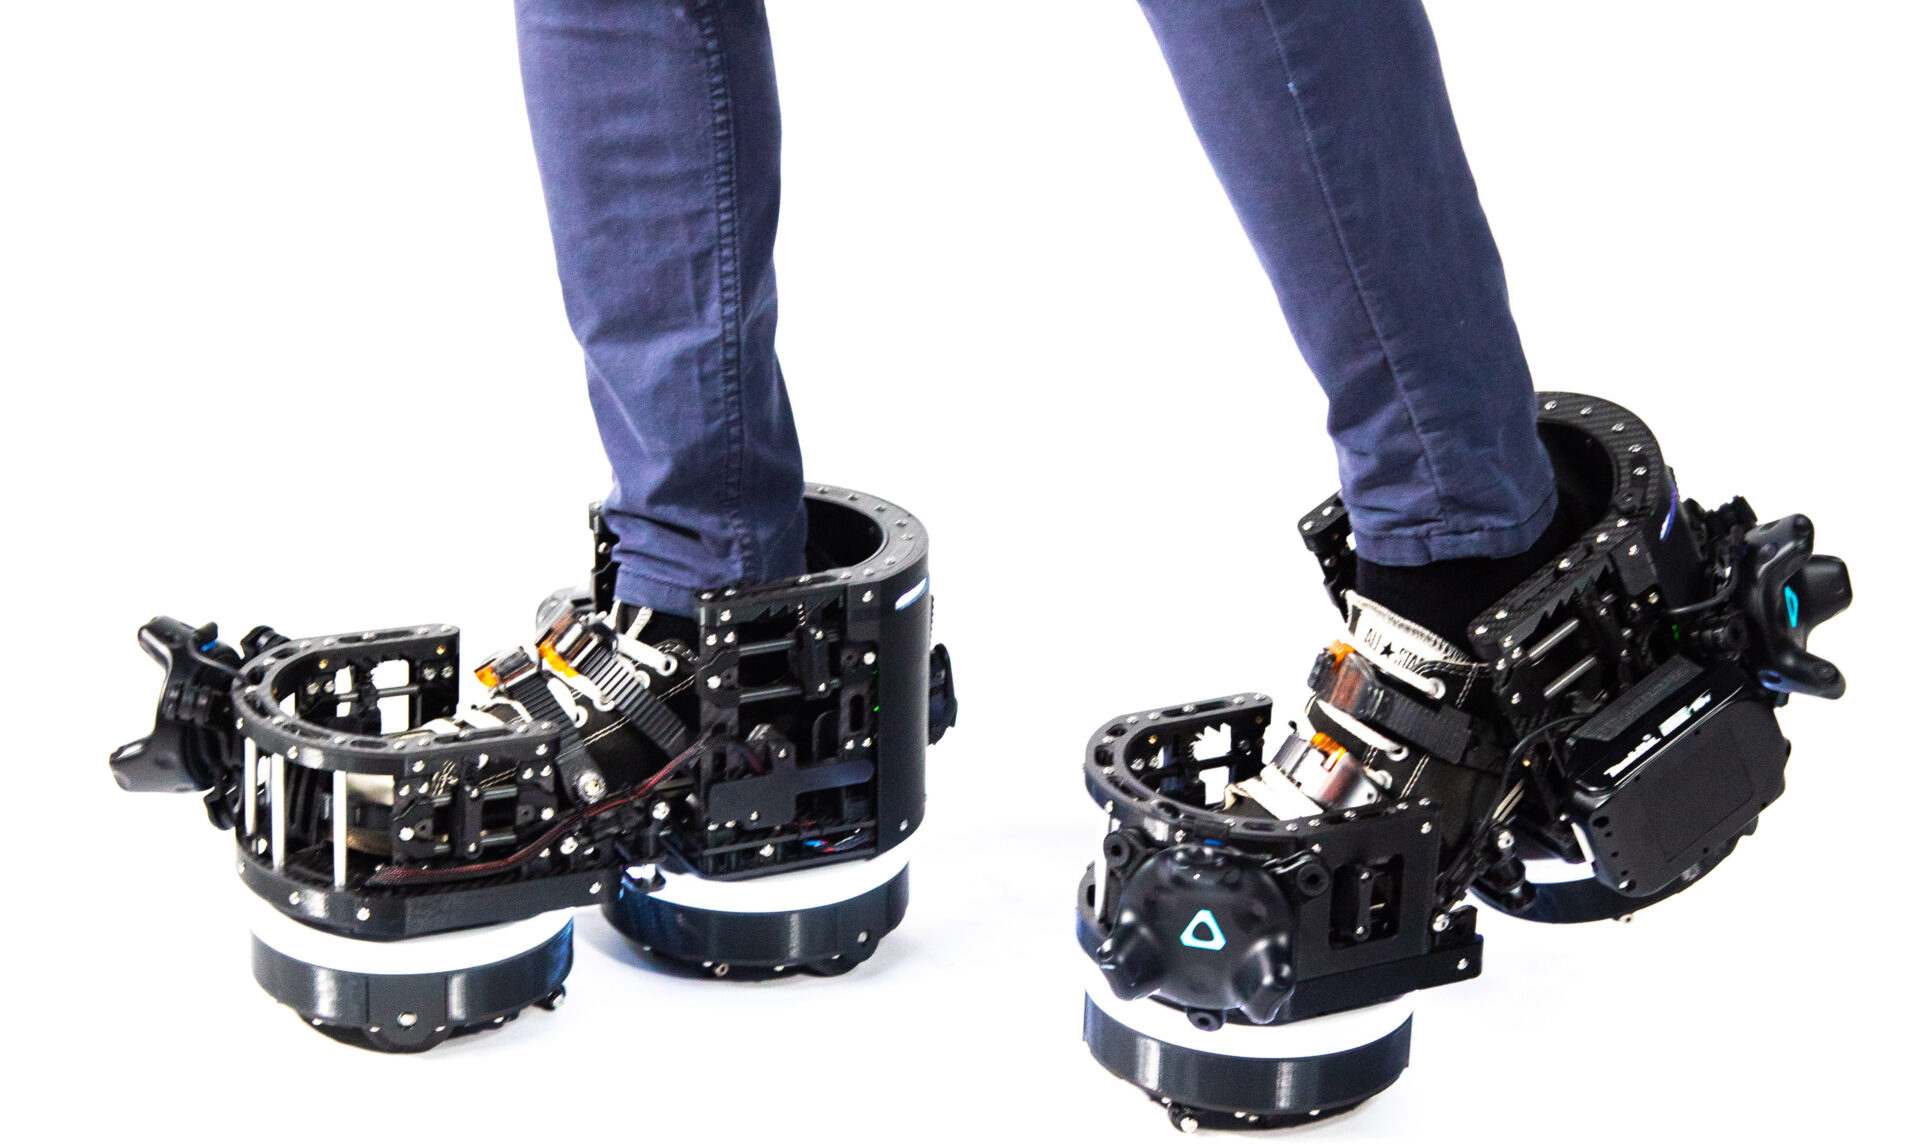 This company's solution to VR locomotion: huge robot shoes | PC Gamer